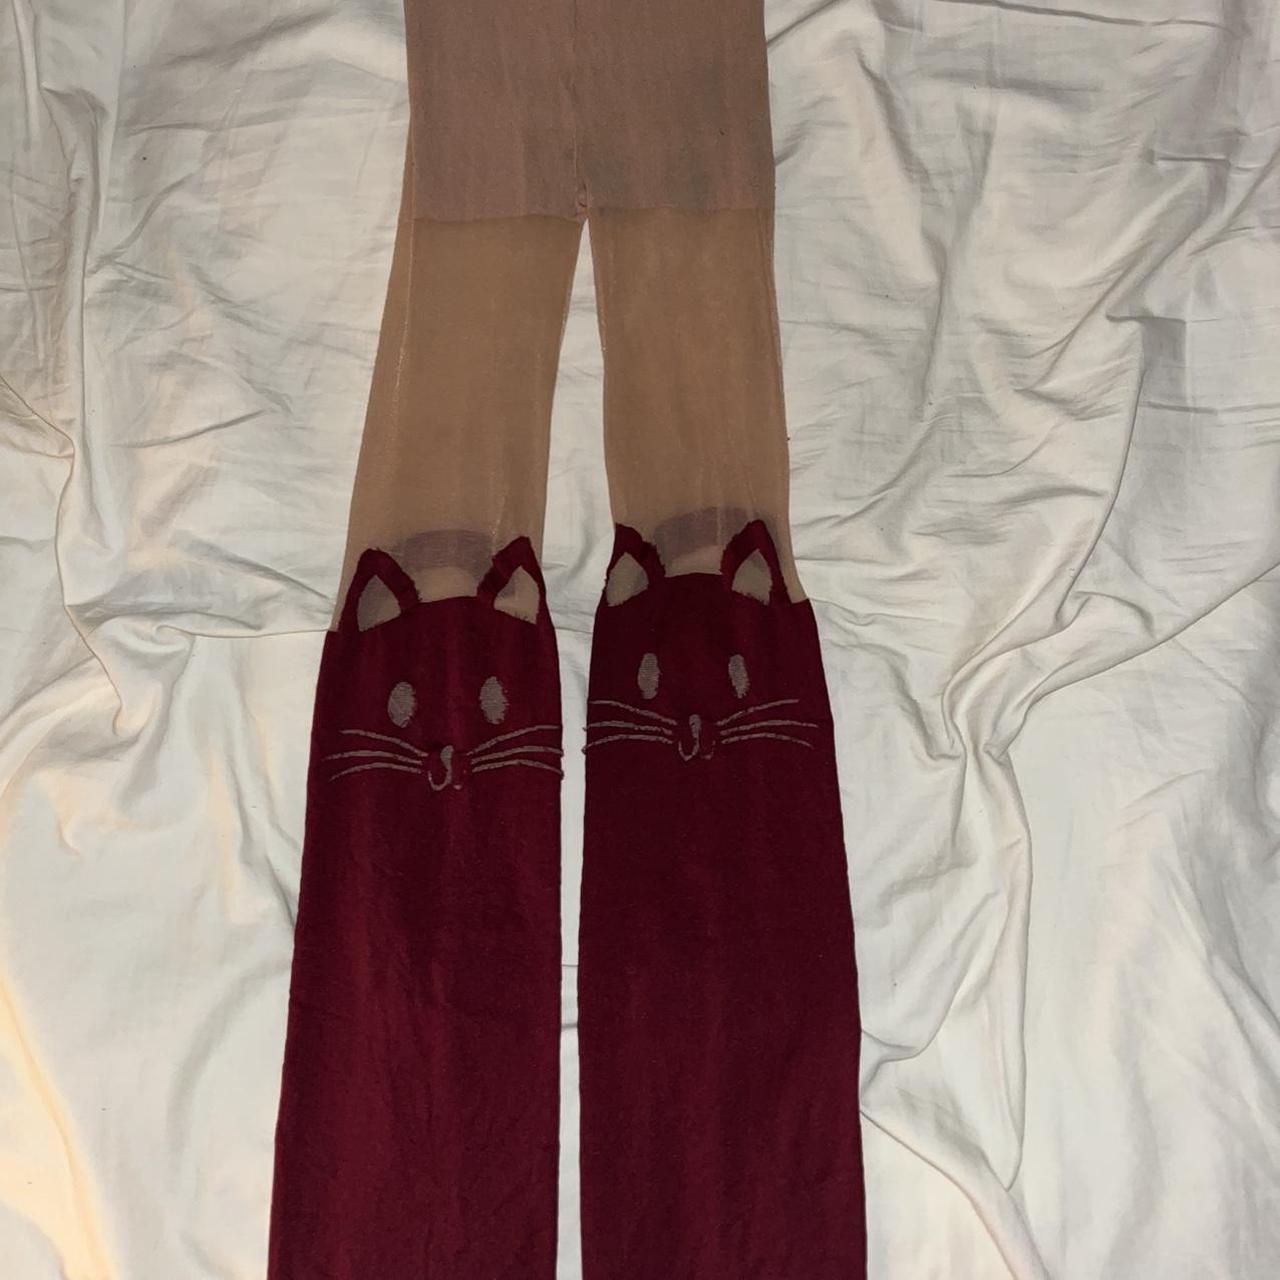 Hot Topic Women's Burgundy and Tan Hosiery-tights (2)